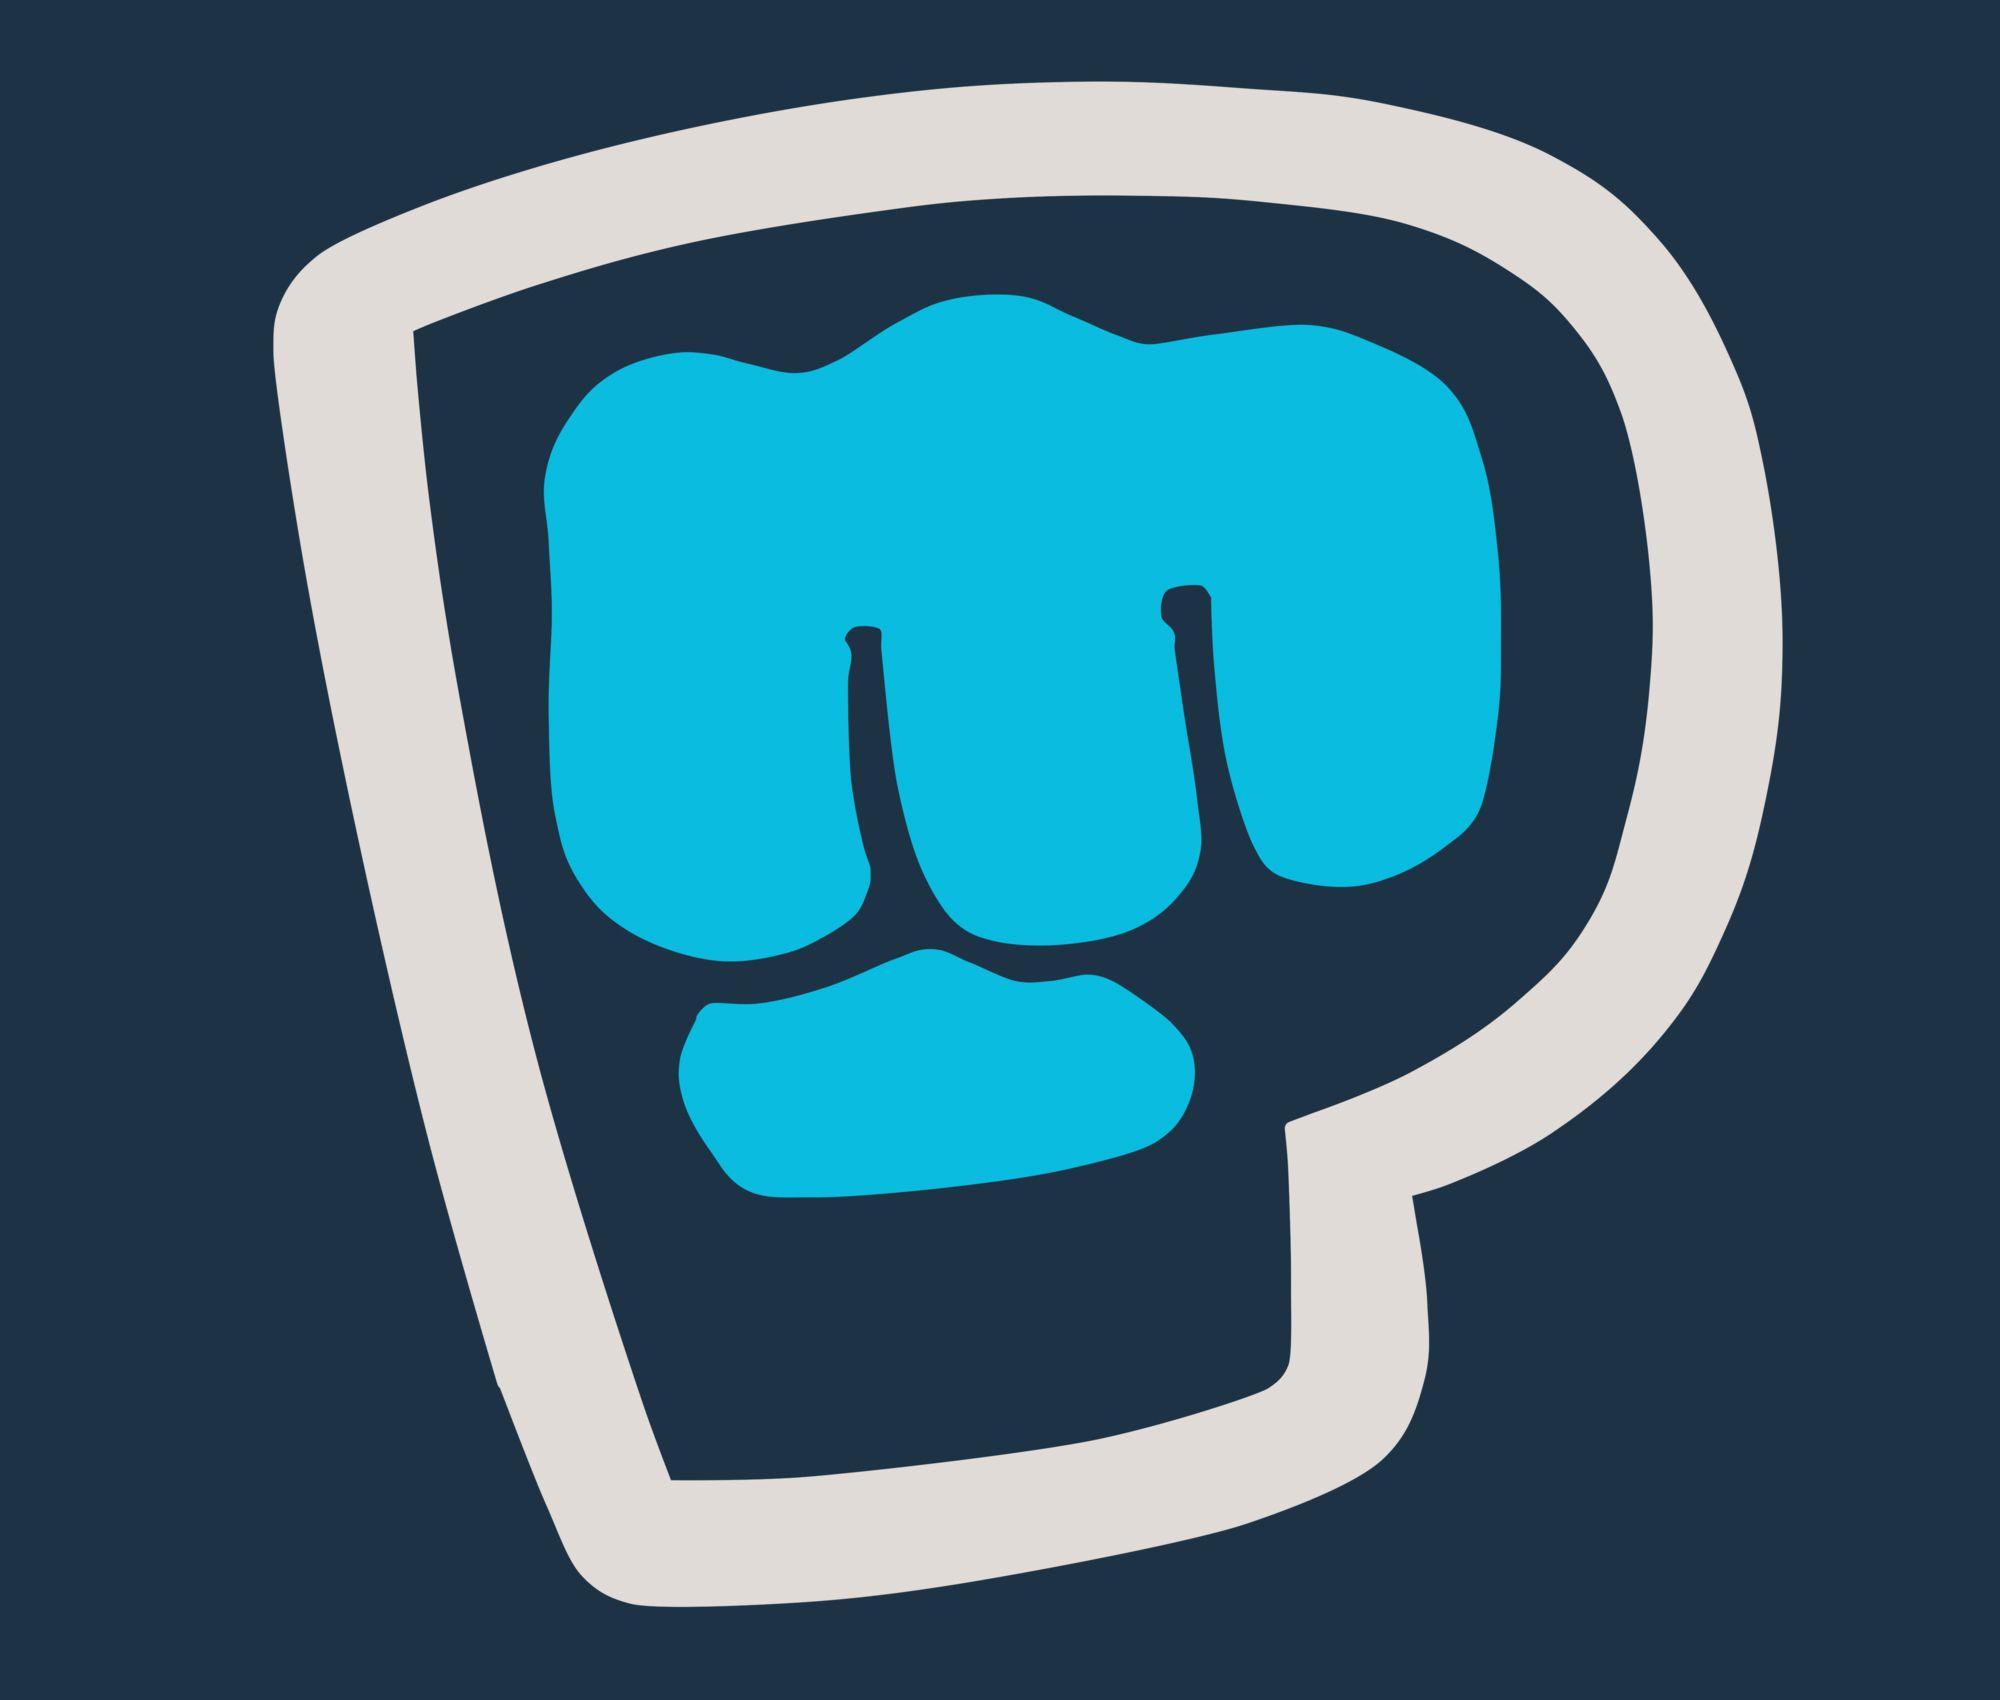 PewDiePie Logo - Meaning PewDiePie logo and symbol | history and evolution